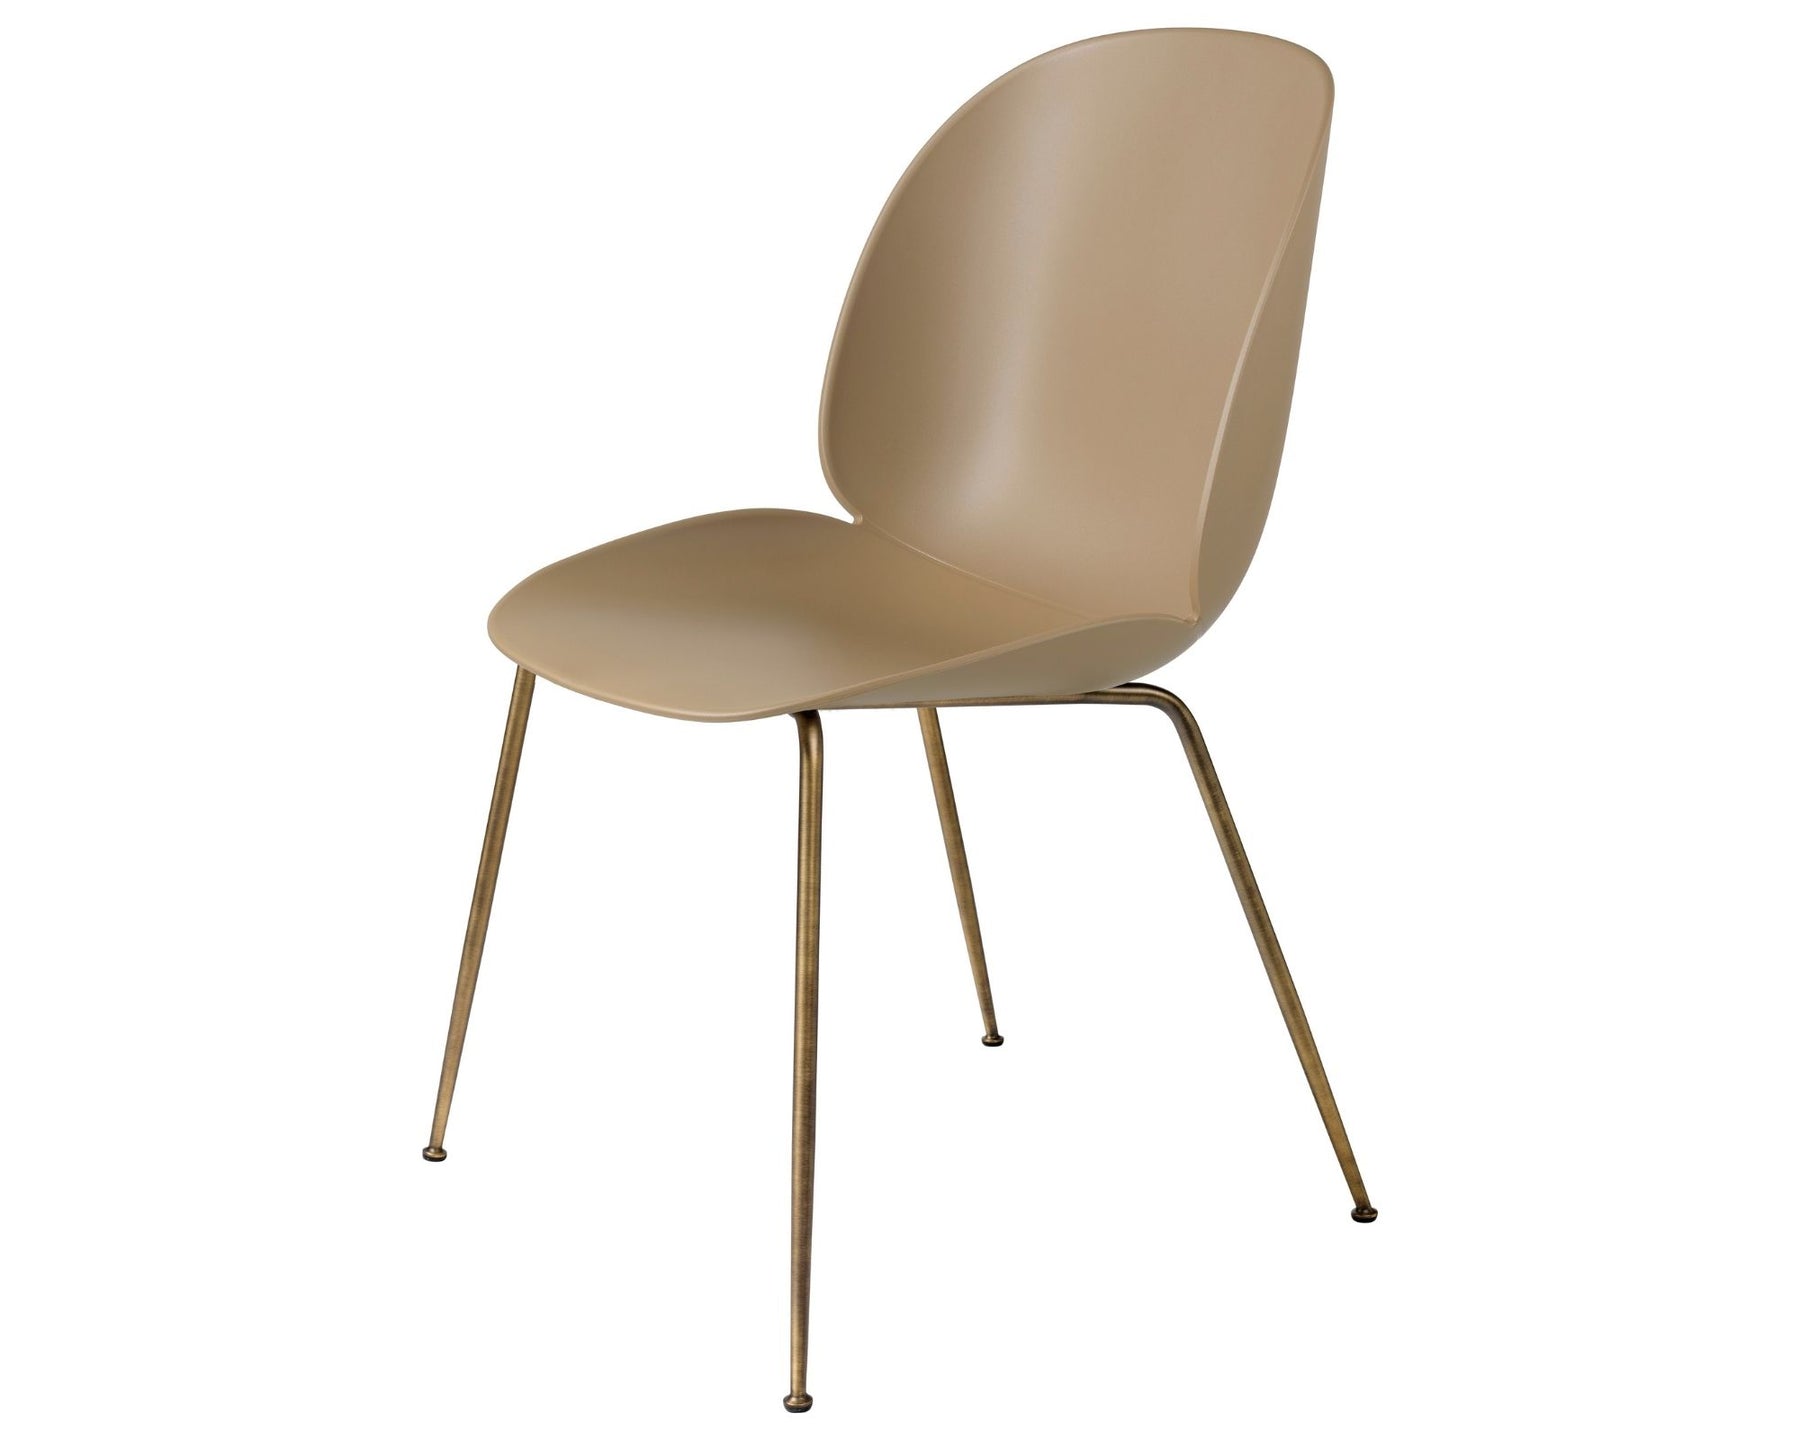 Pebble Brown Dining Chair with Antique Brass Base | DSHOP